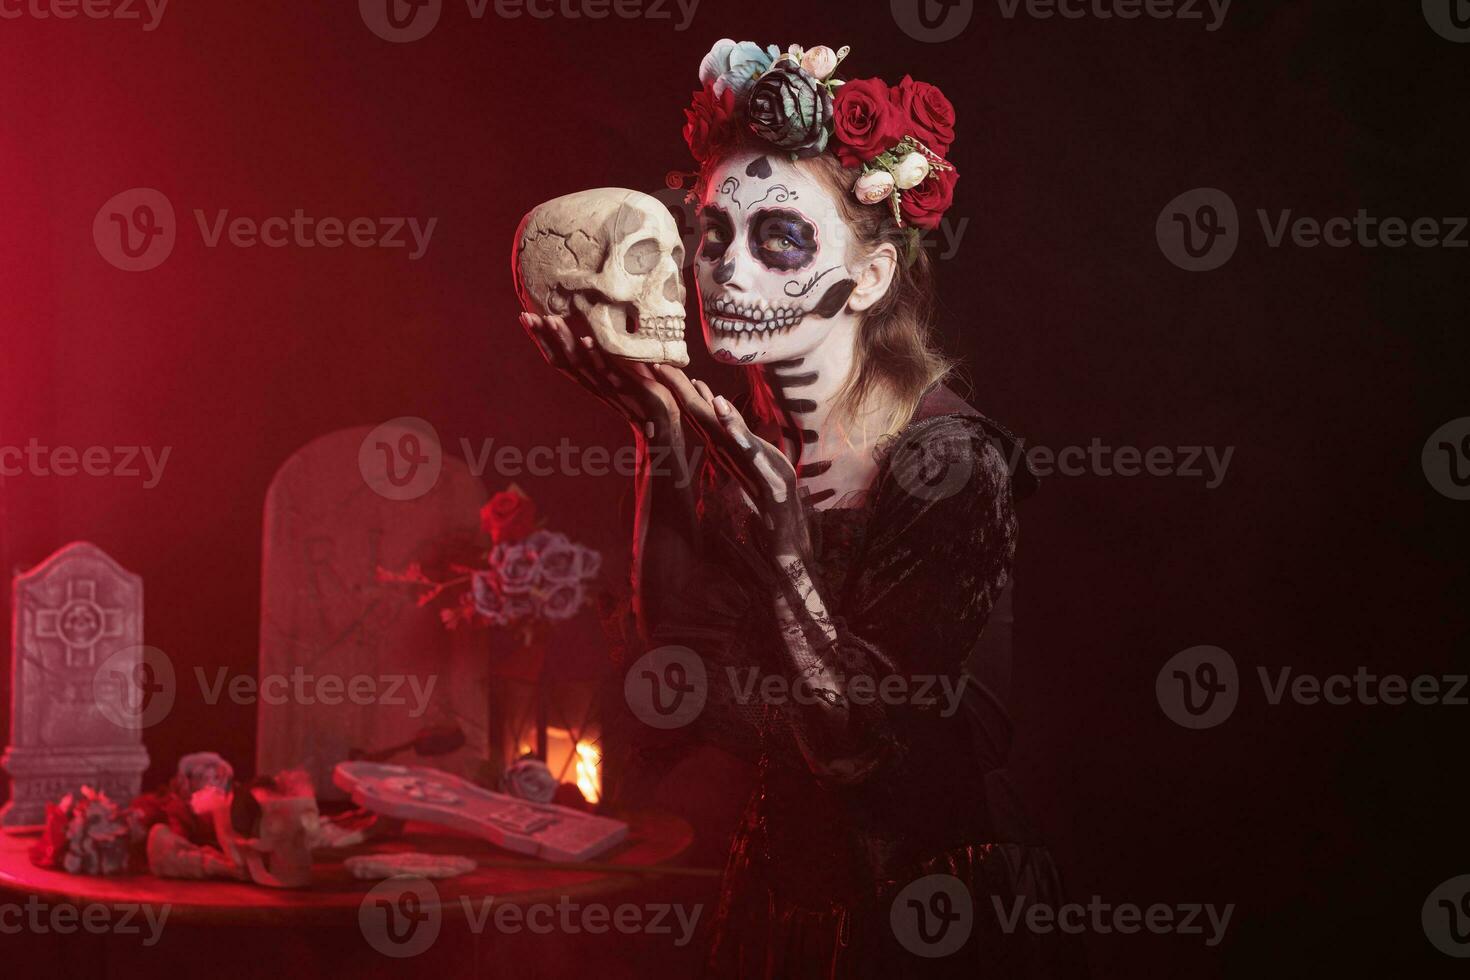 Santa muerte model holding skull in studio, acting scary and horror to celebrate mexican halloween. Beautiful woman in festival costume with body art, looking like goddess of death. photo